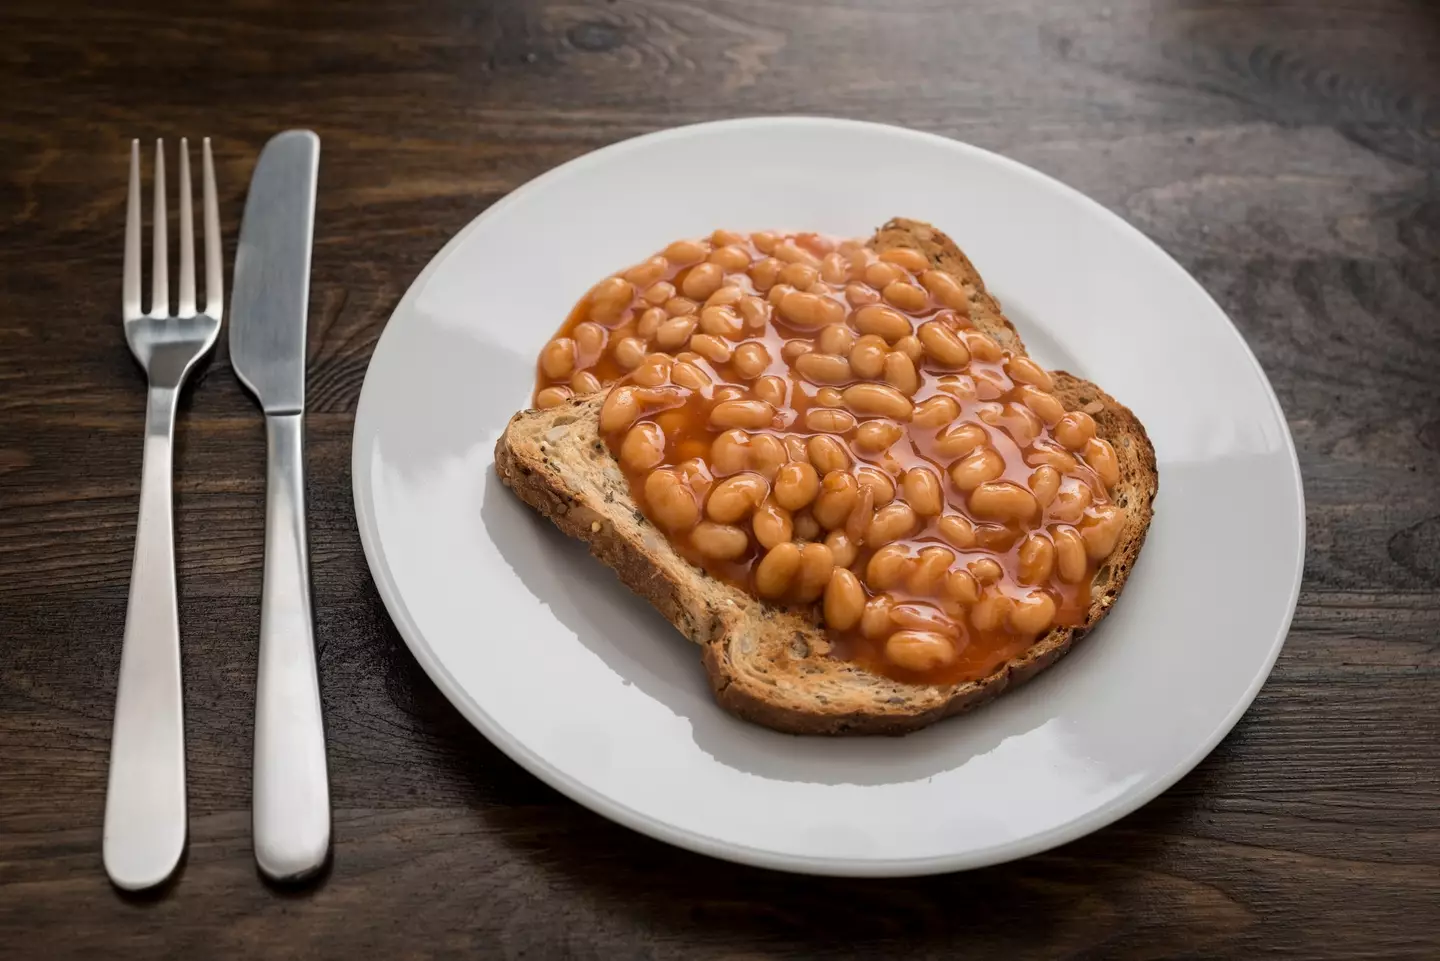 Baked beans are high in fibre and rich in protein.